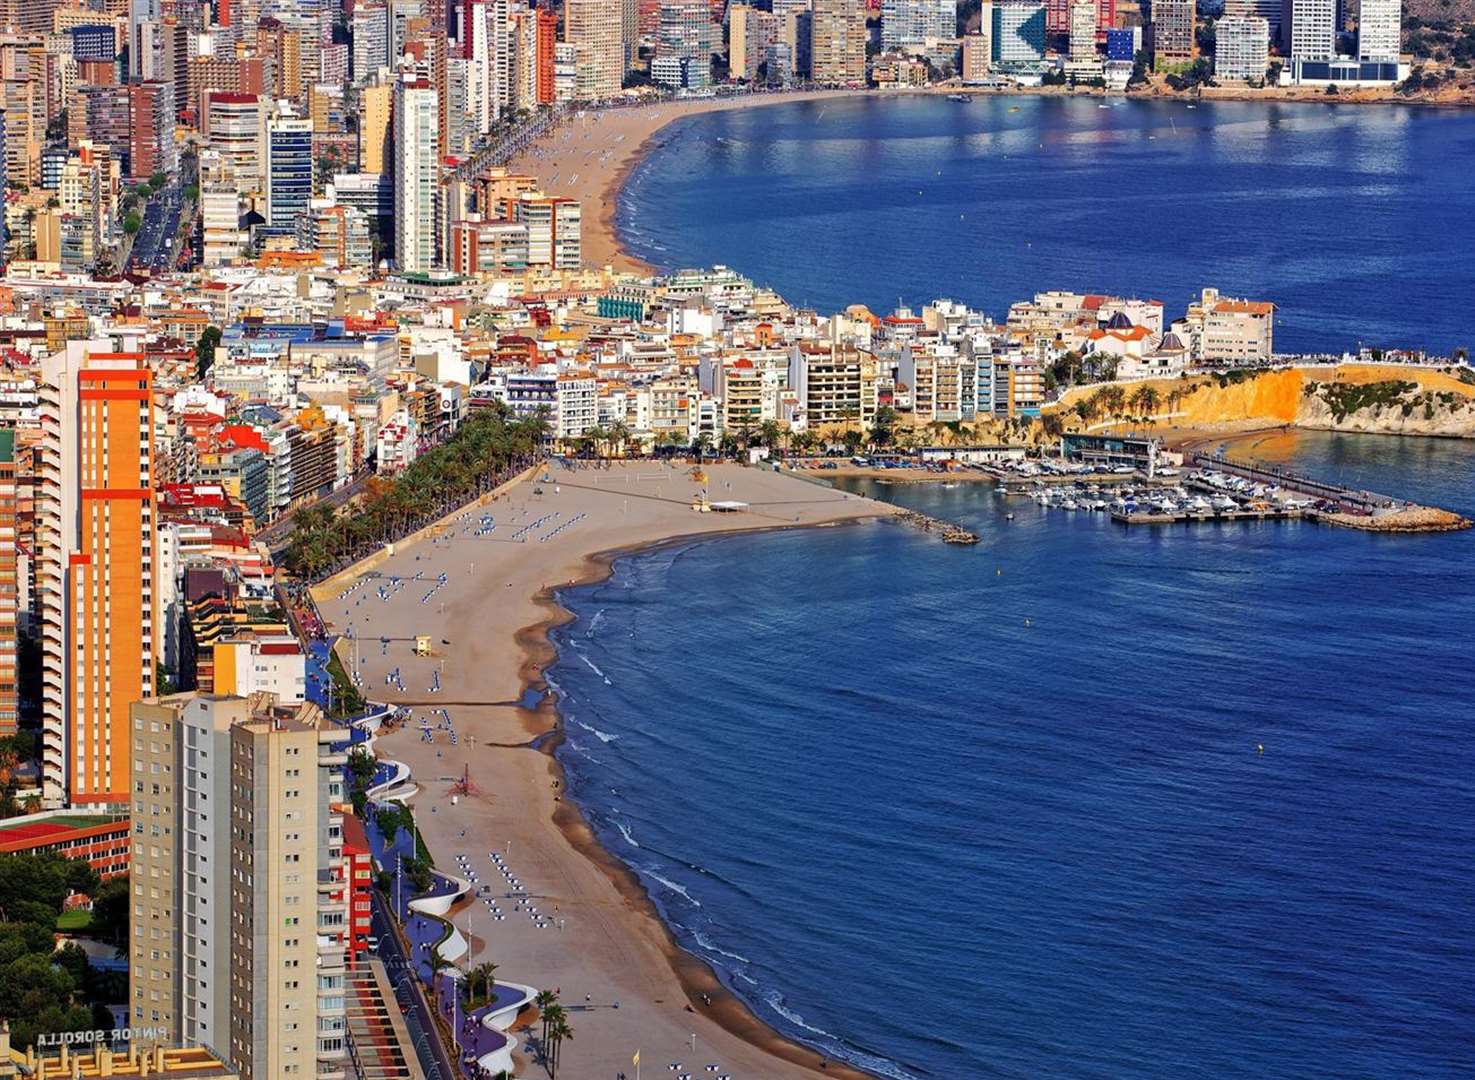 What happened during three days in Benidorm